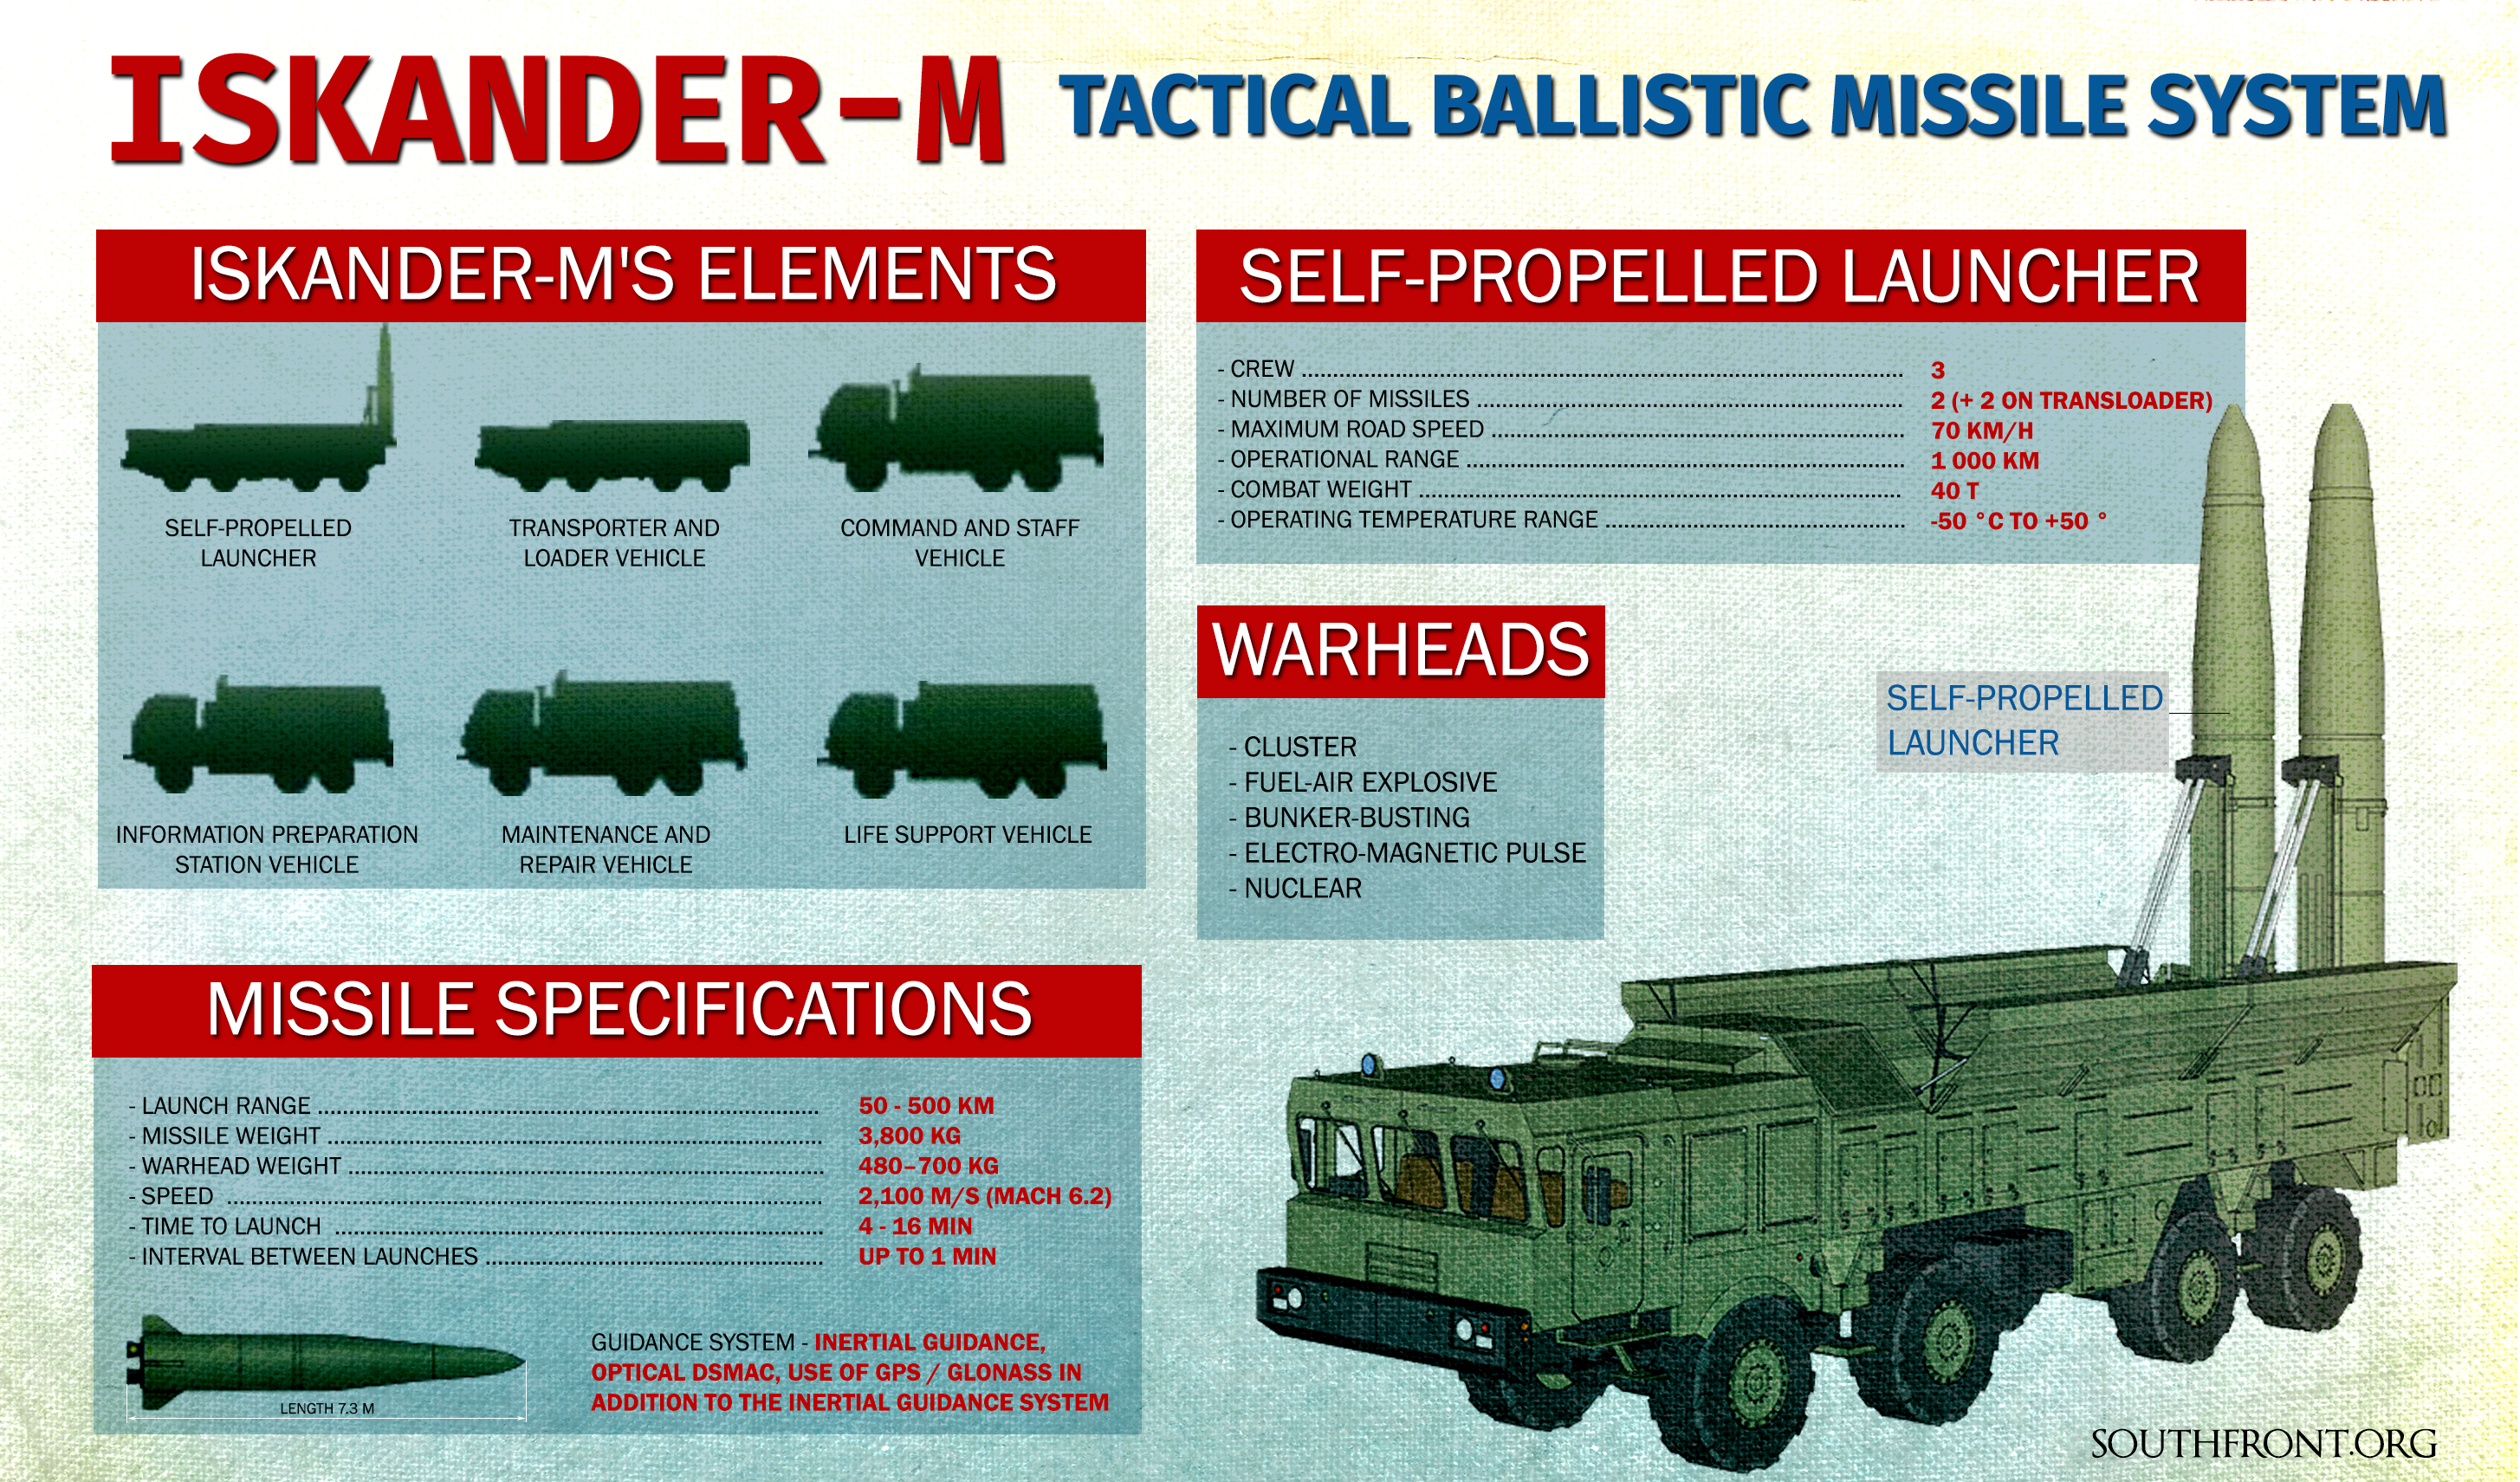 Russia Deploys Nuclear Missiles In Retaliation To NATO "Threats"